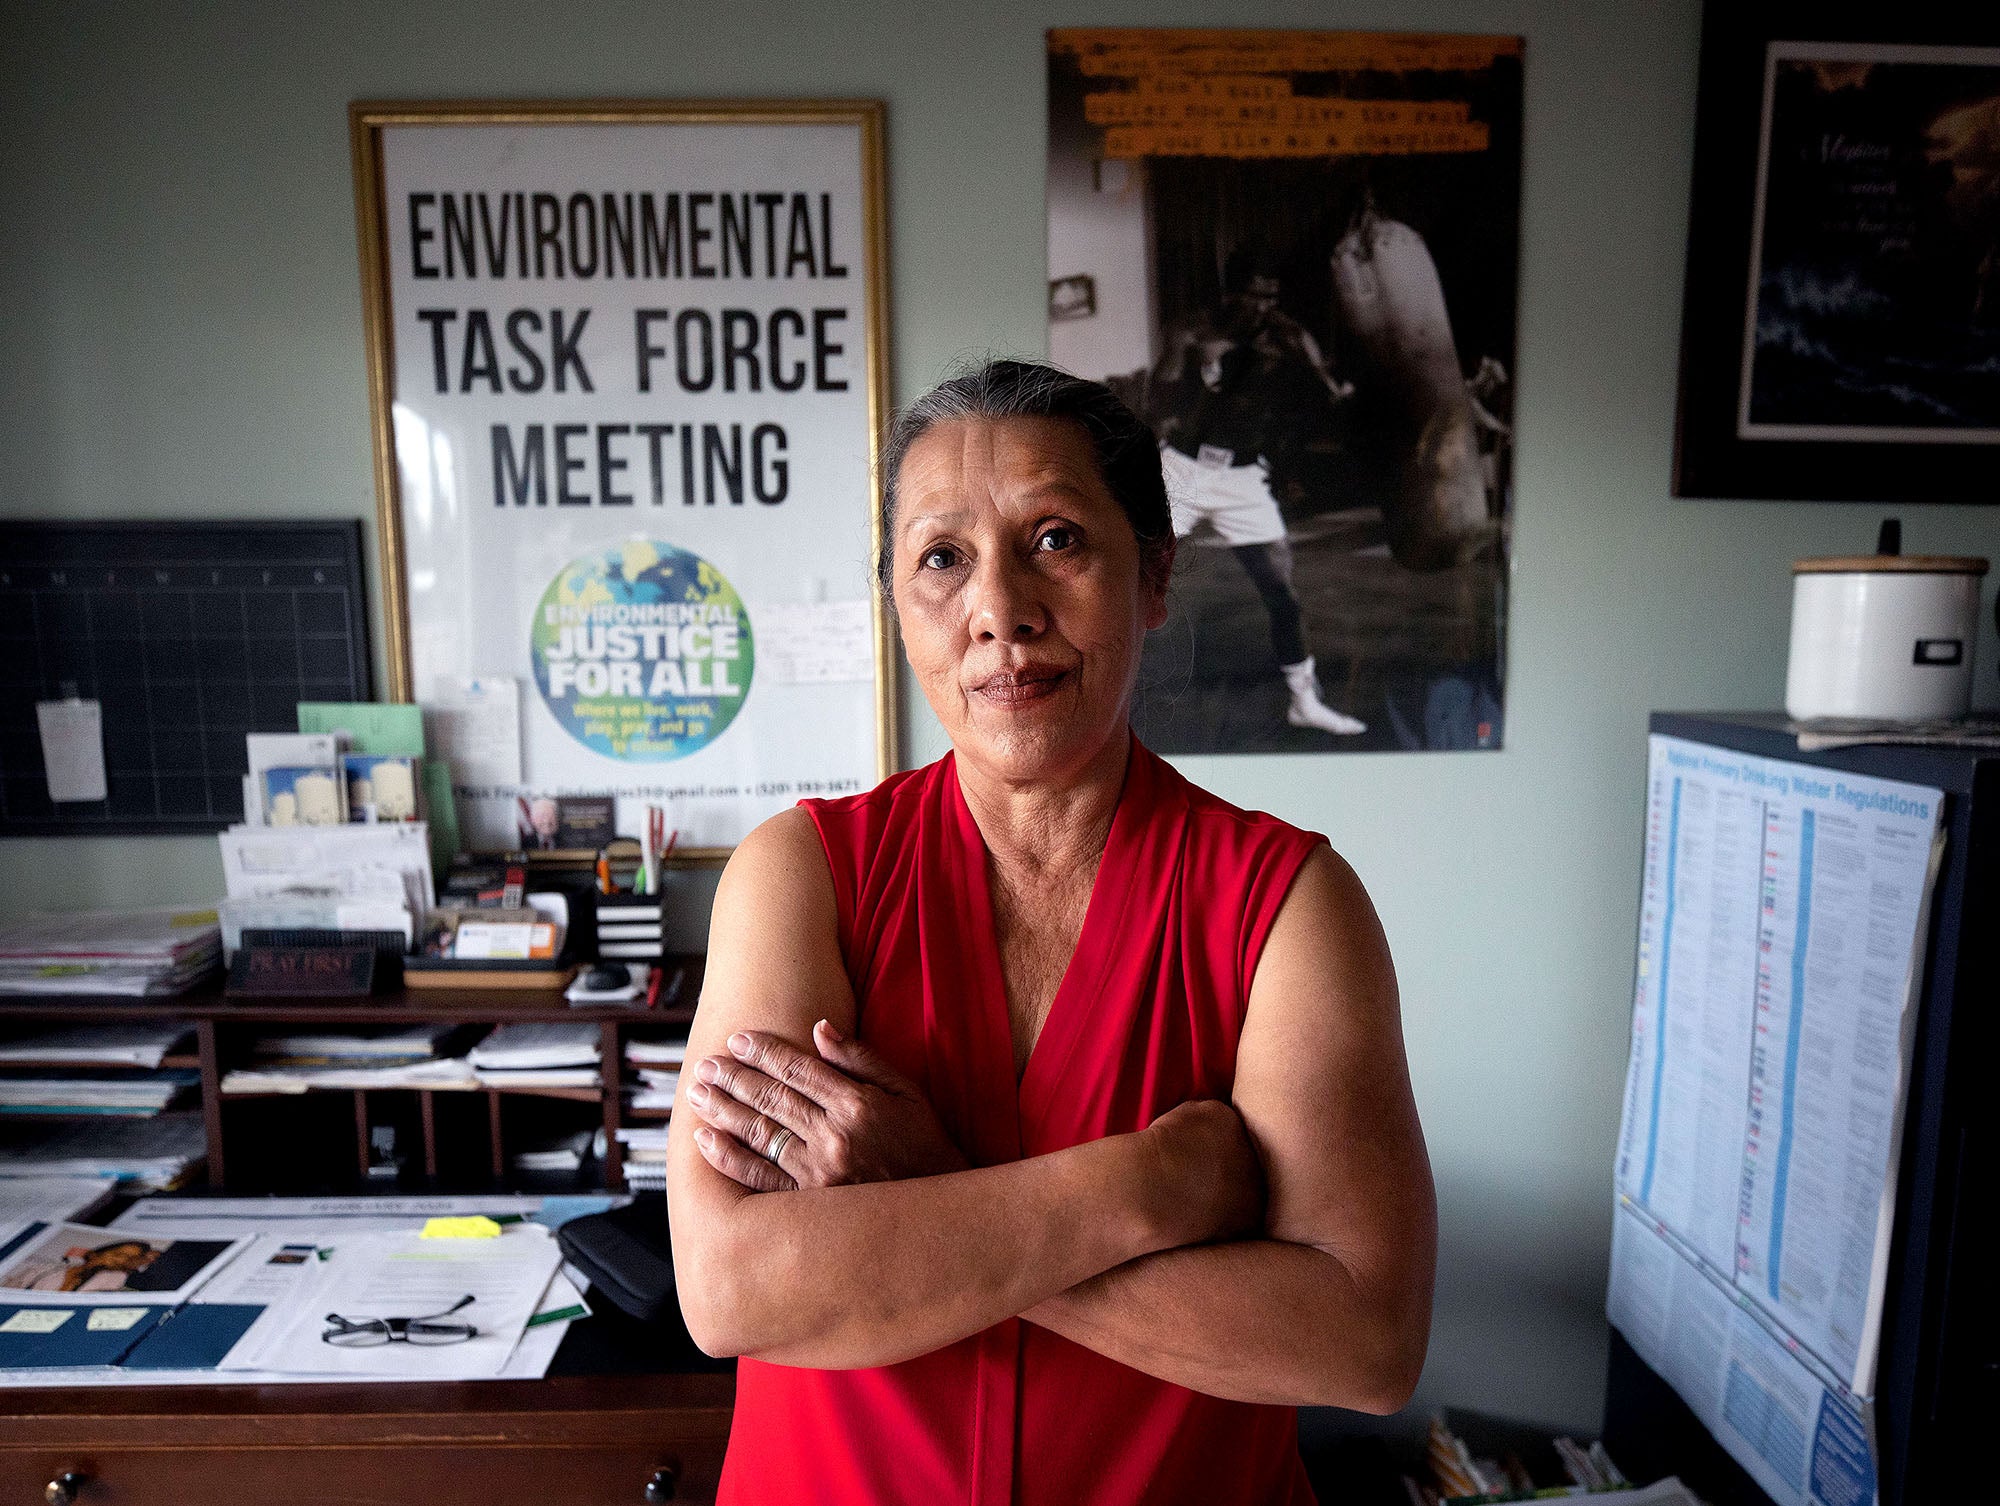 Linda stands in her home office looking at the camera with her arms crossed. A poster in the background says "Environmental Justice Task Force Meeting"